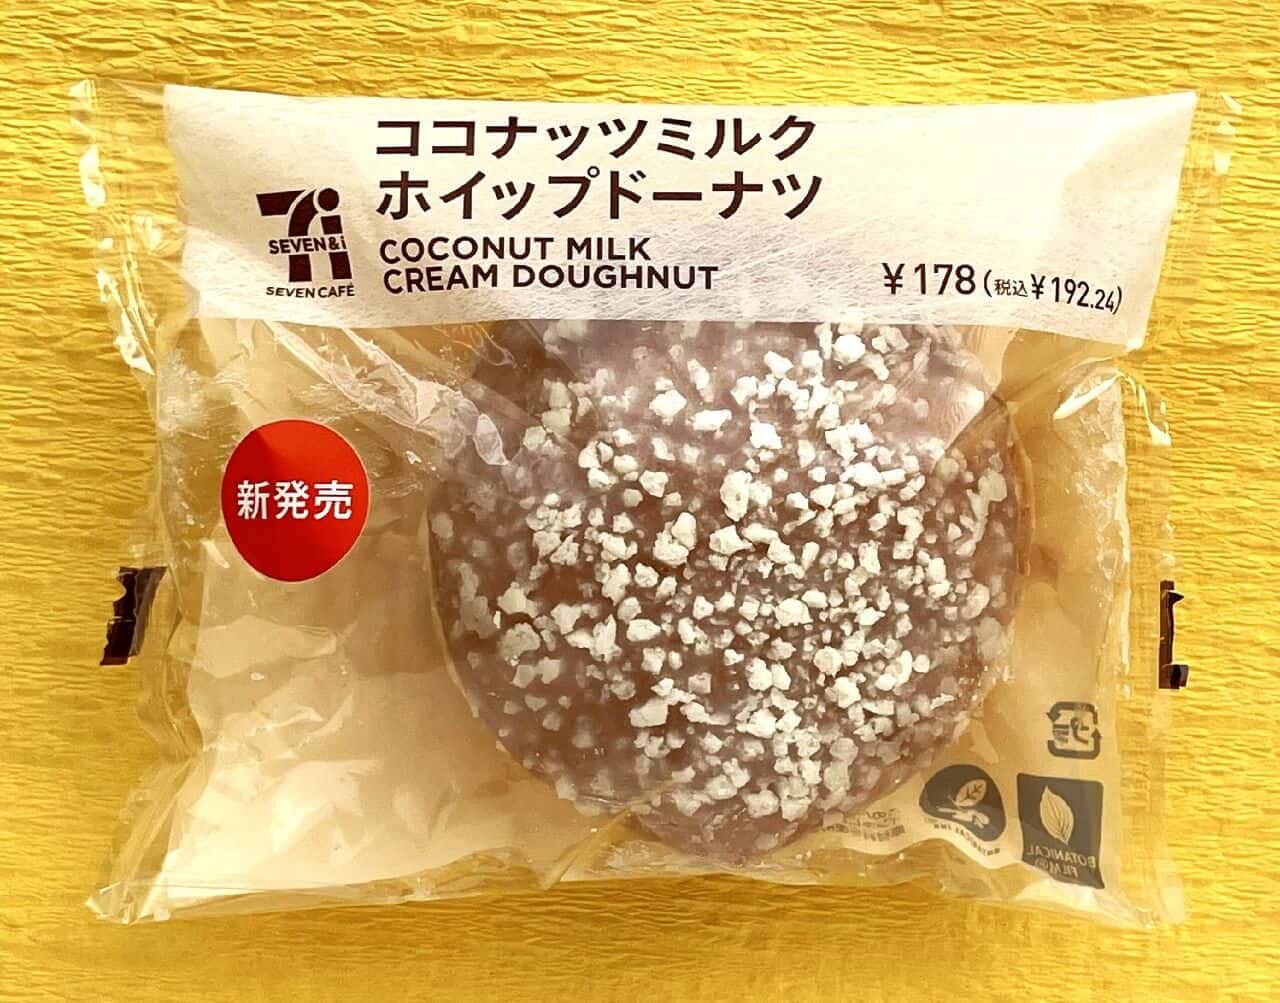 7-Eleven "Coconut Milk Whipped Donuts